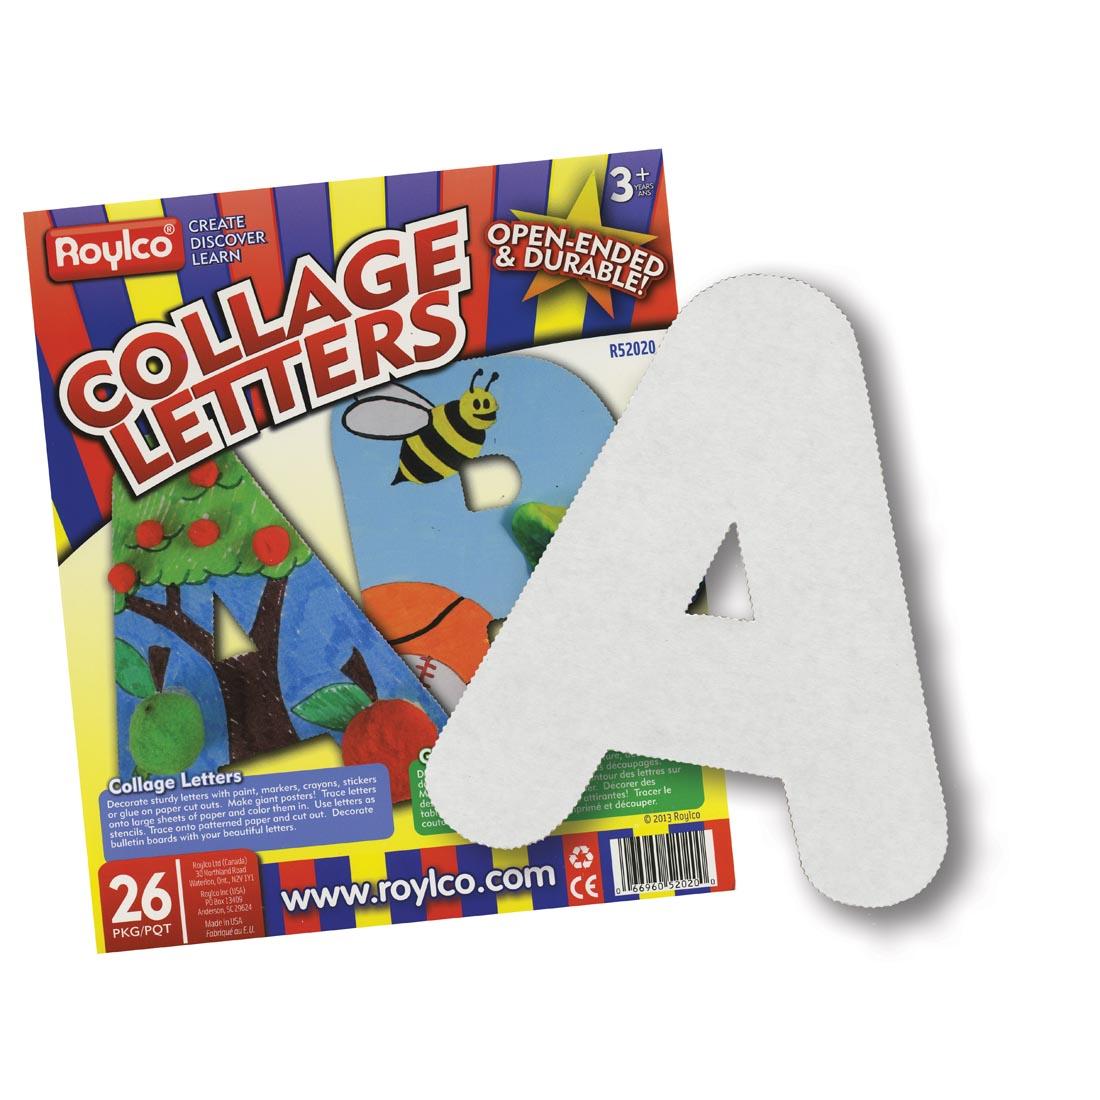 Package of Roylco Big Collage Letters with the A outside